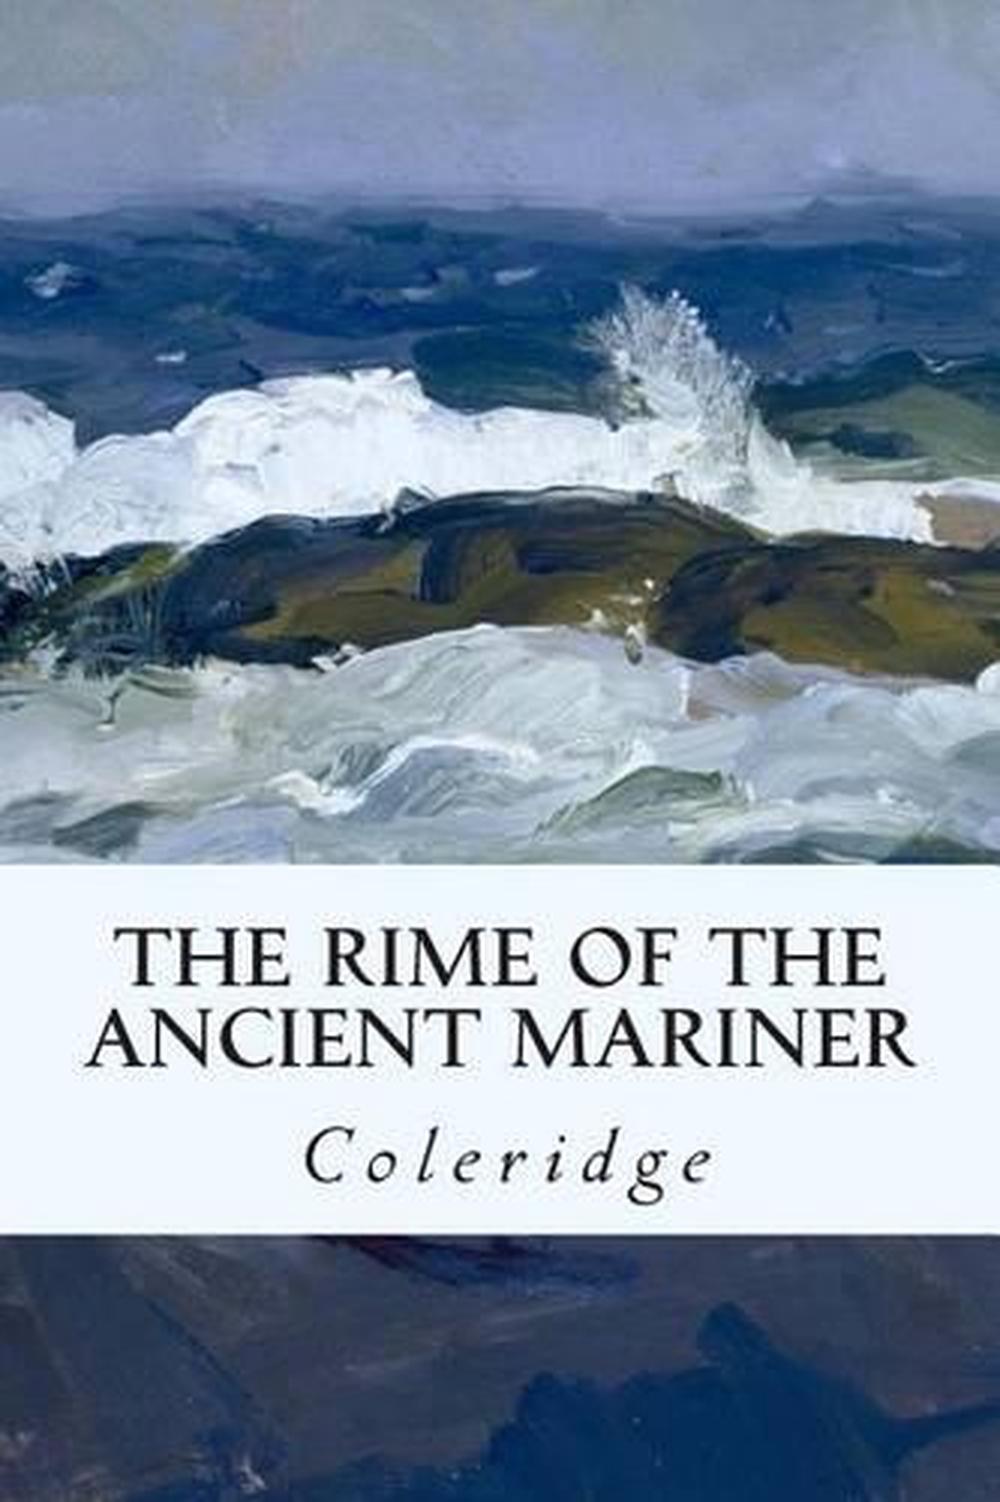 rime of the ancient mariner by st coleridge